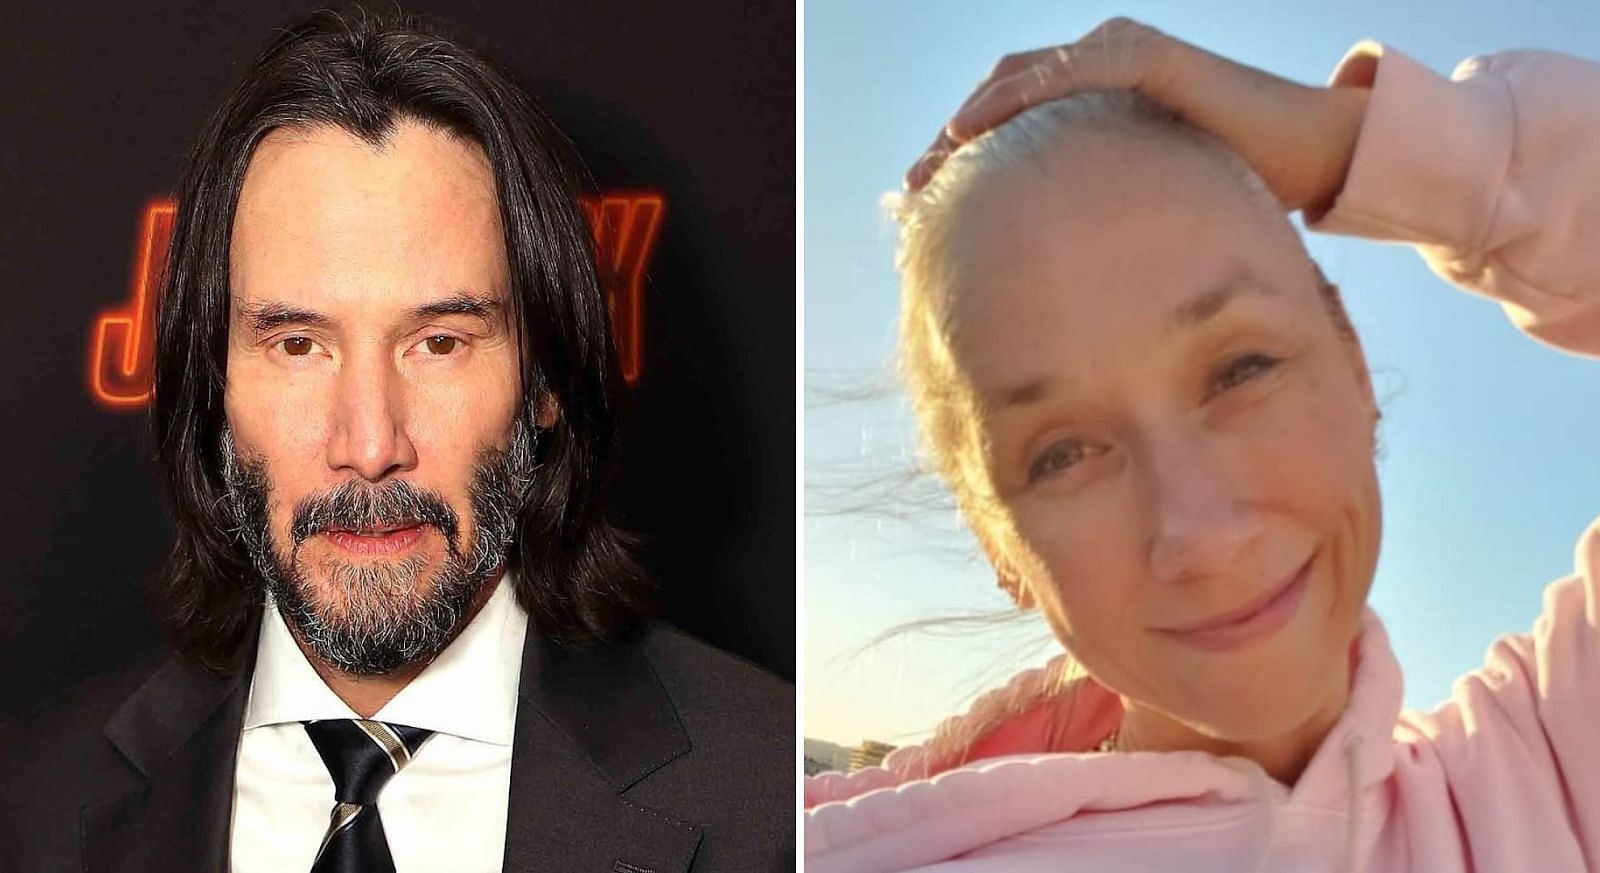 When did Alexander Grant and Keanu Reeves start dating?